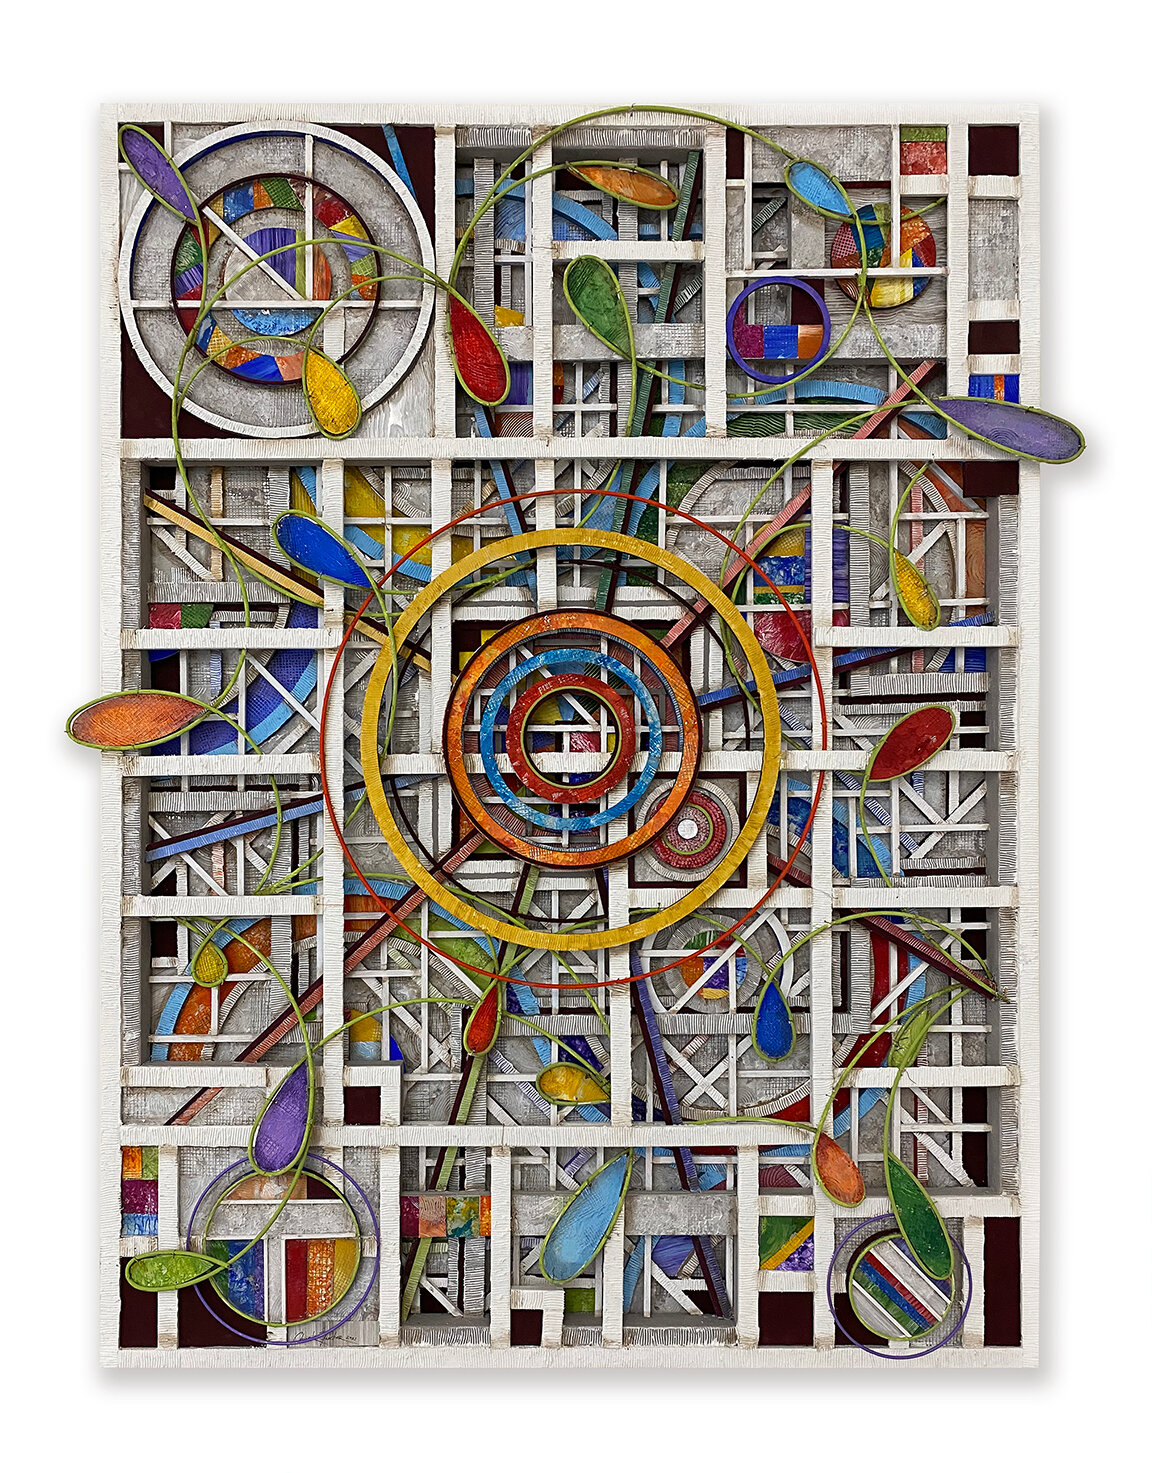 “Spectrum, Composition No. 4,” by Chuck Fischer, is an aluminum, wood and acrylic composition.